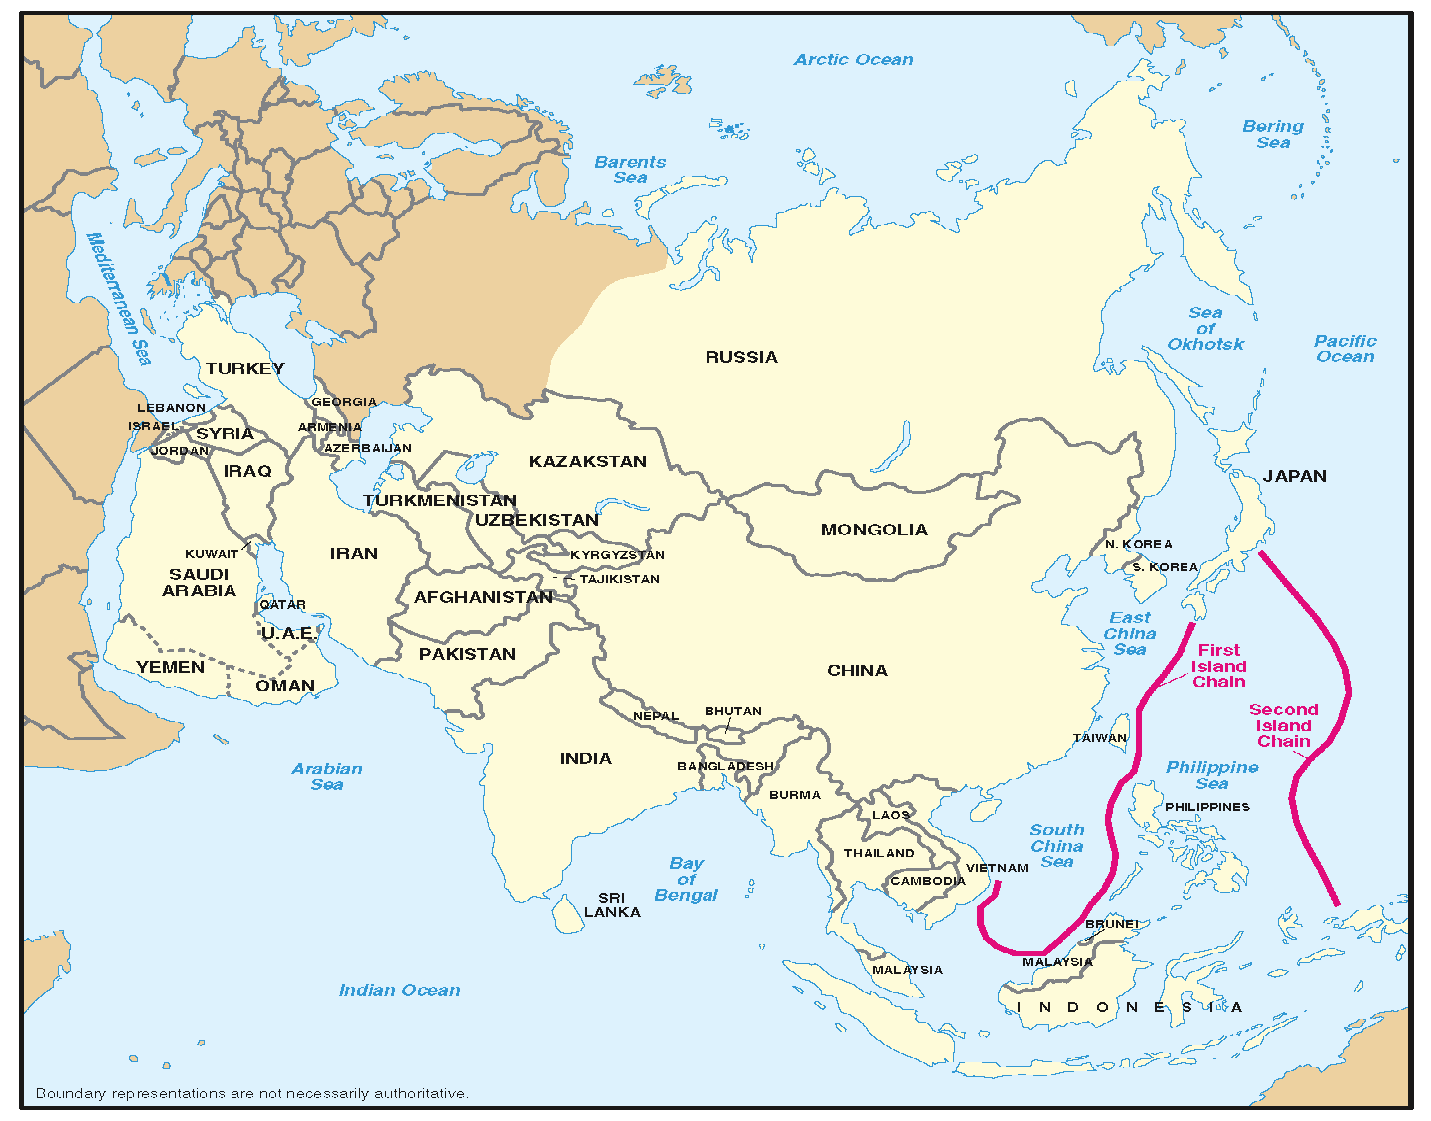 Map of China's First and Second Island Chains